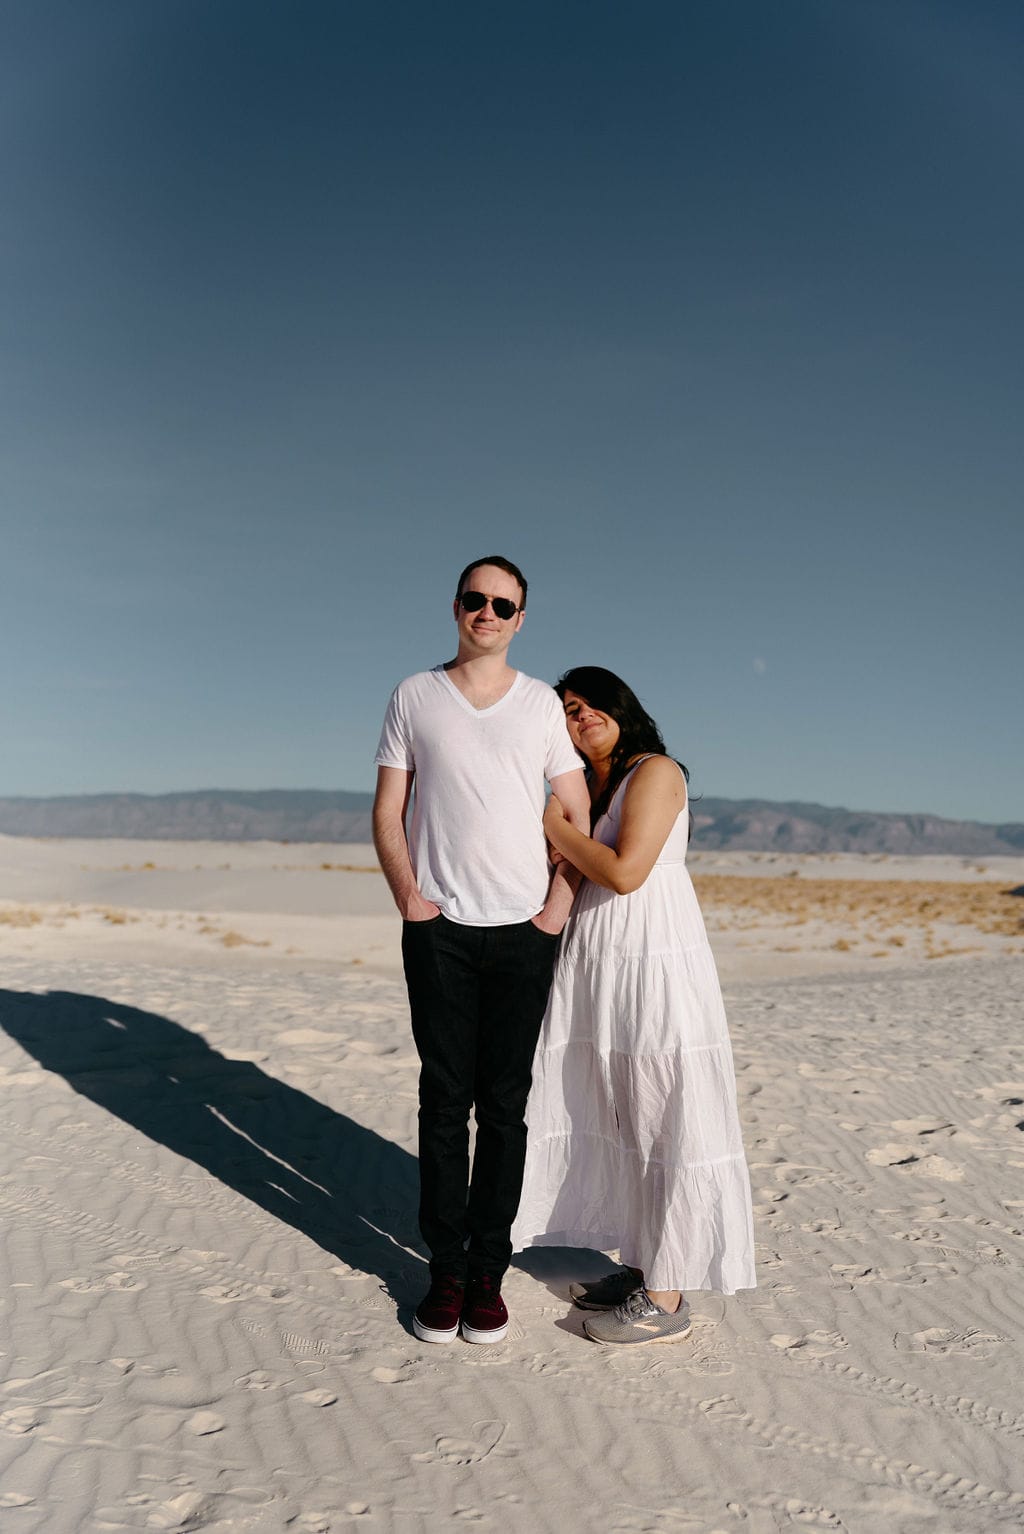 Couple in the desert with sunglasses and sand dunes